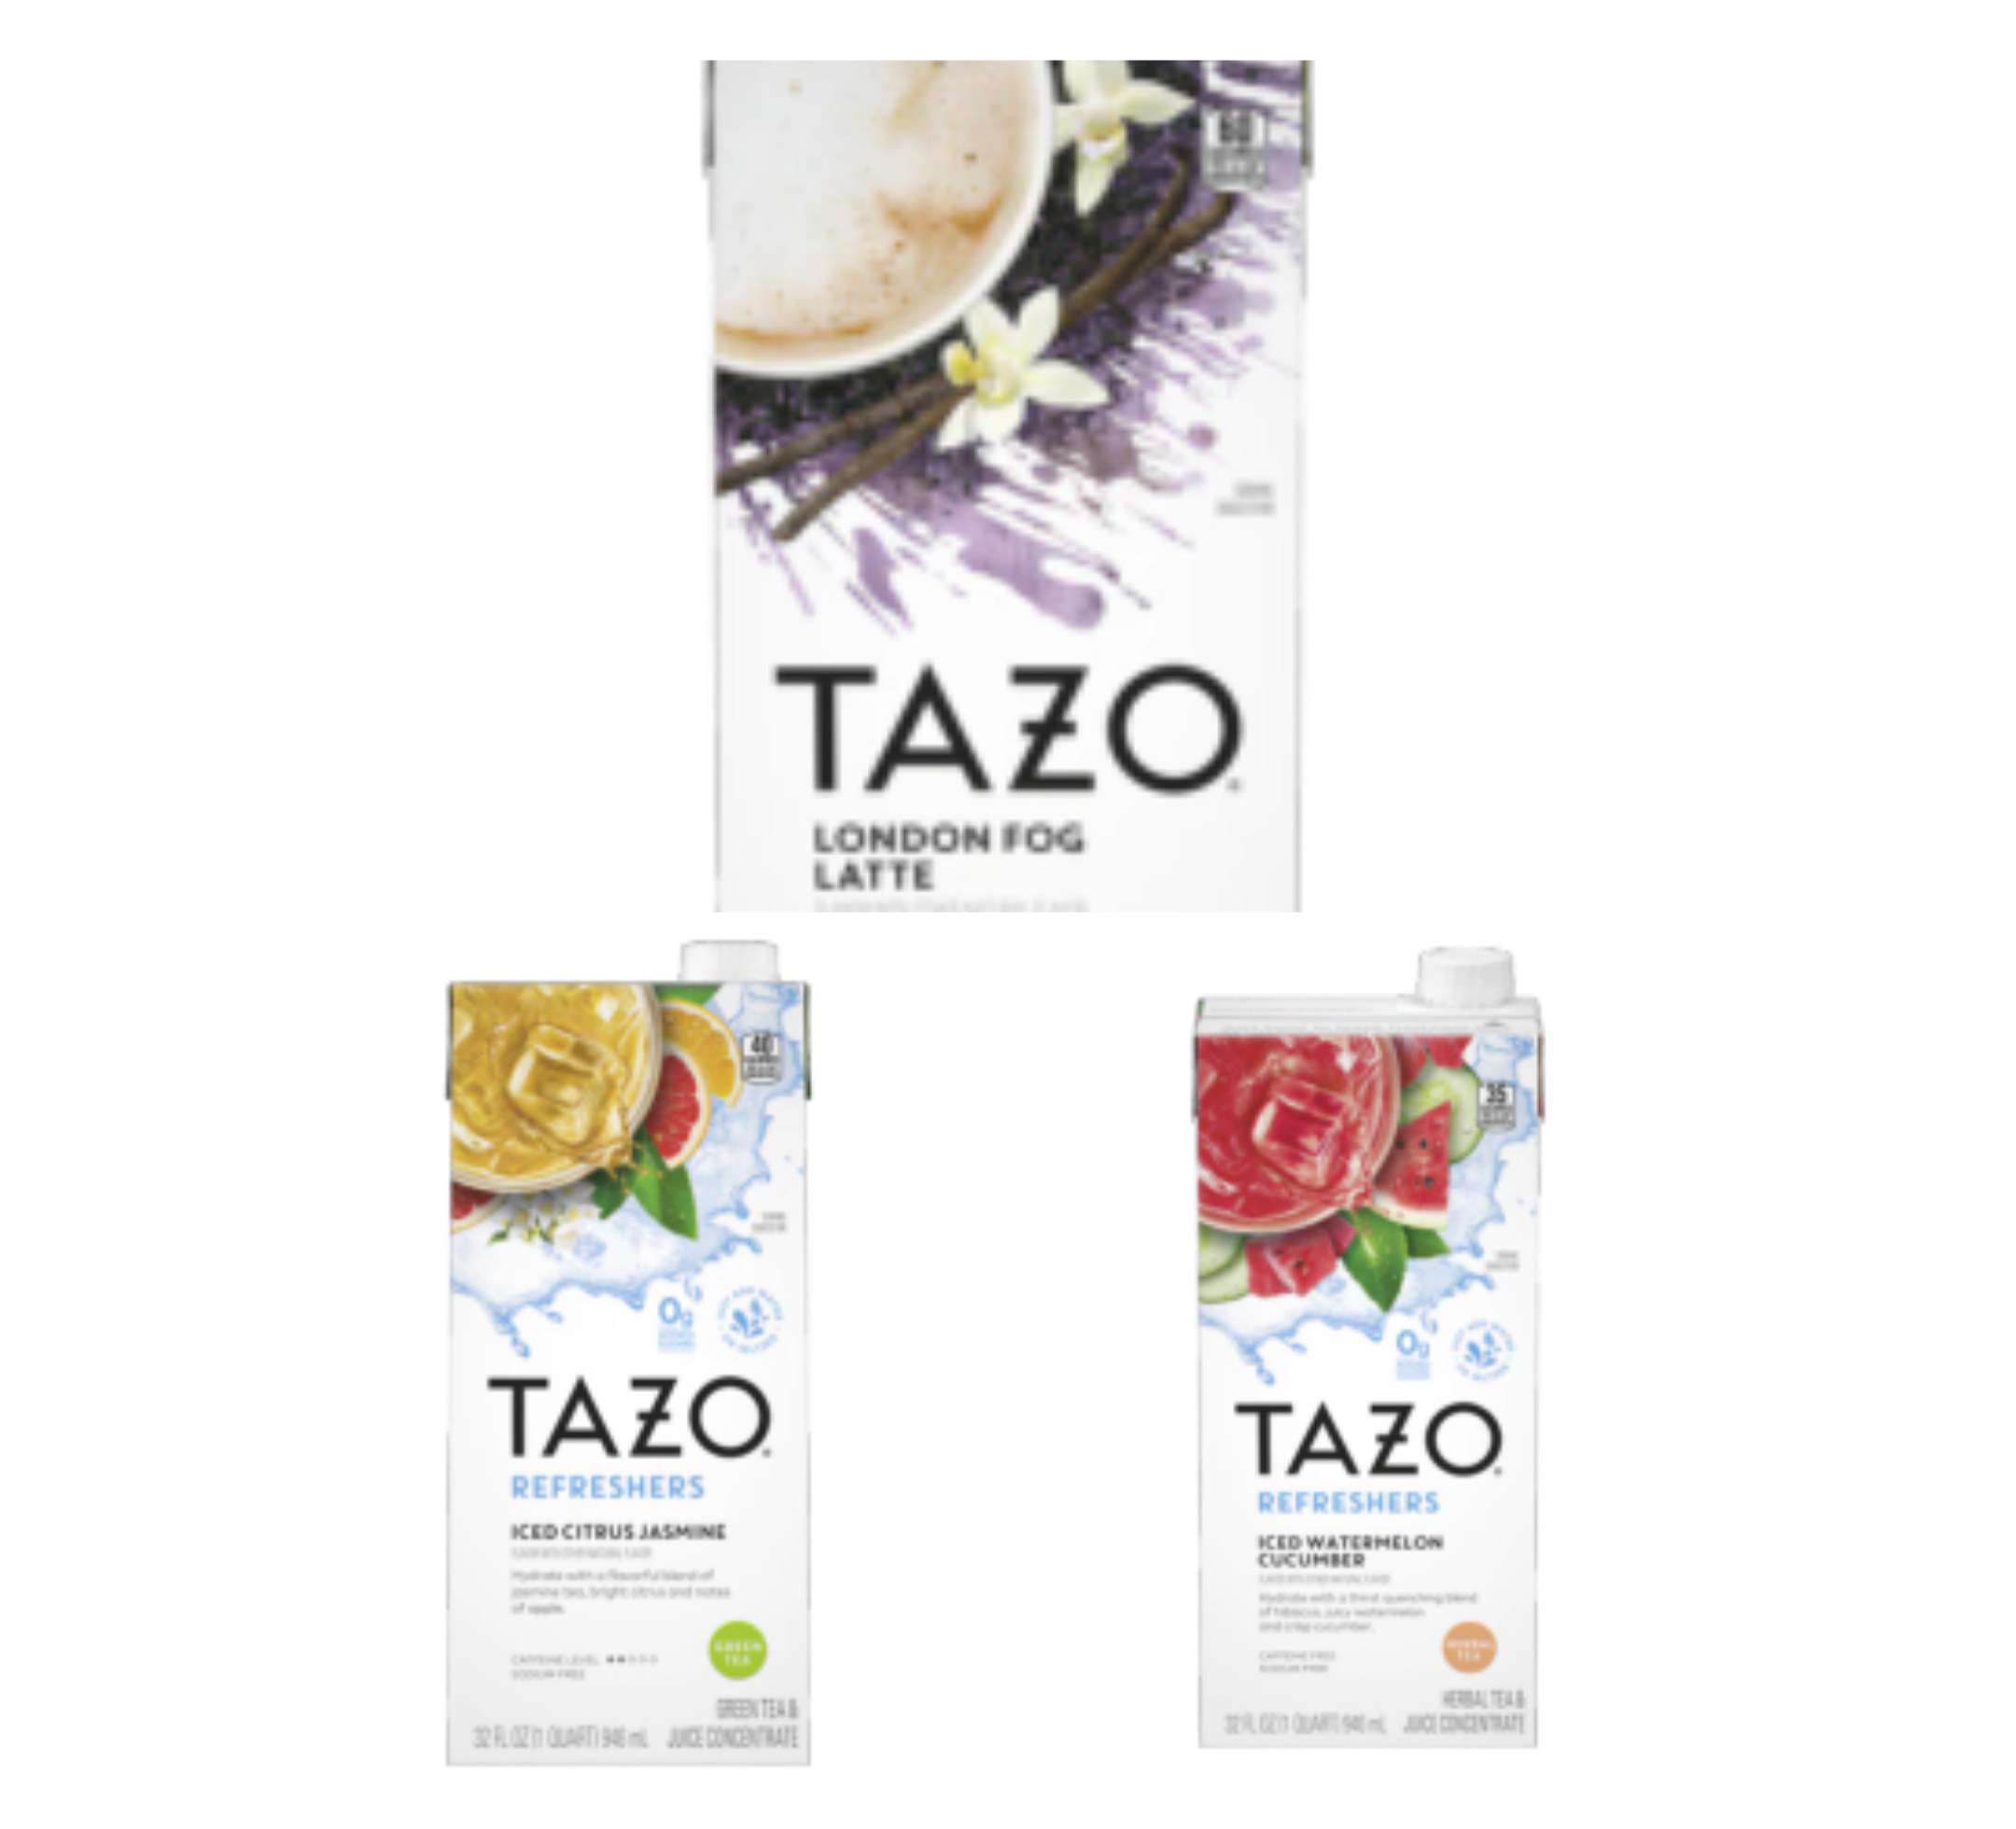 TAZO to make your Summer Taaza and Refreshing! - Food and Beverage